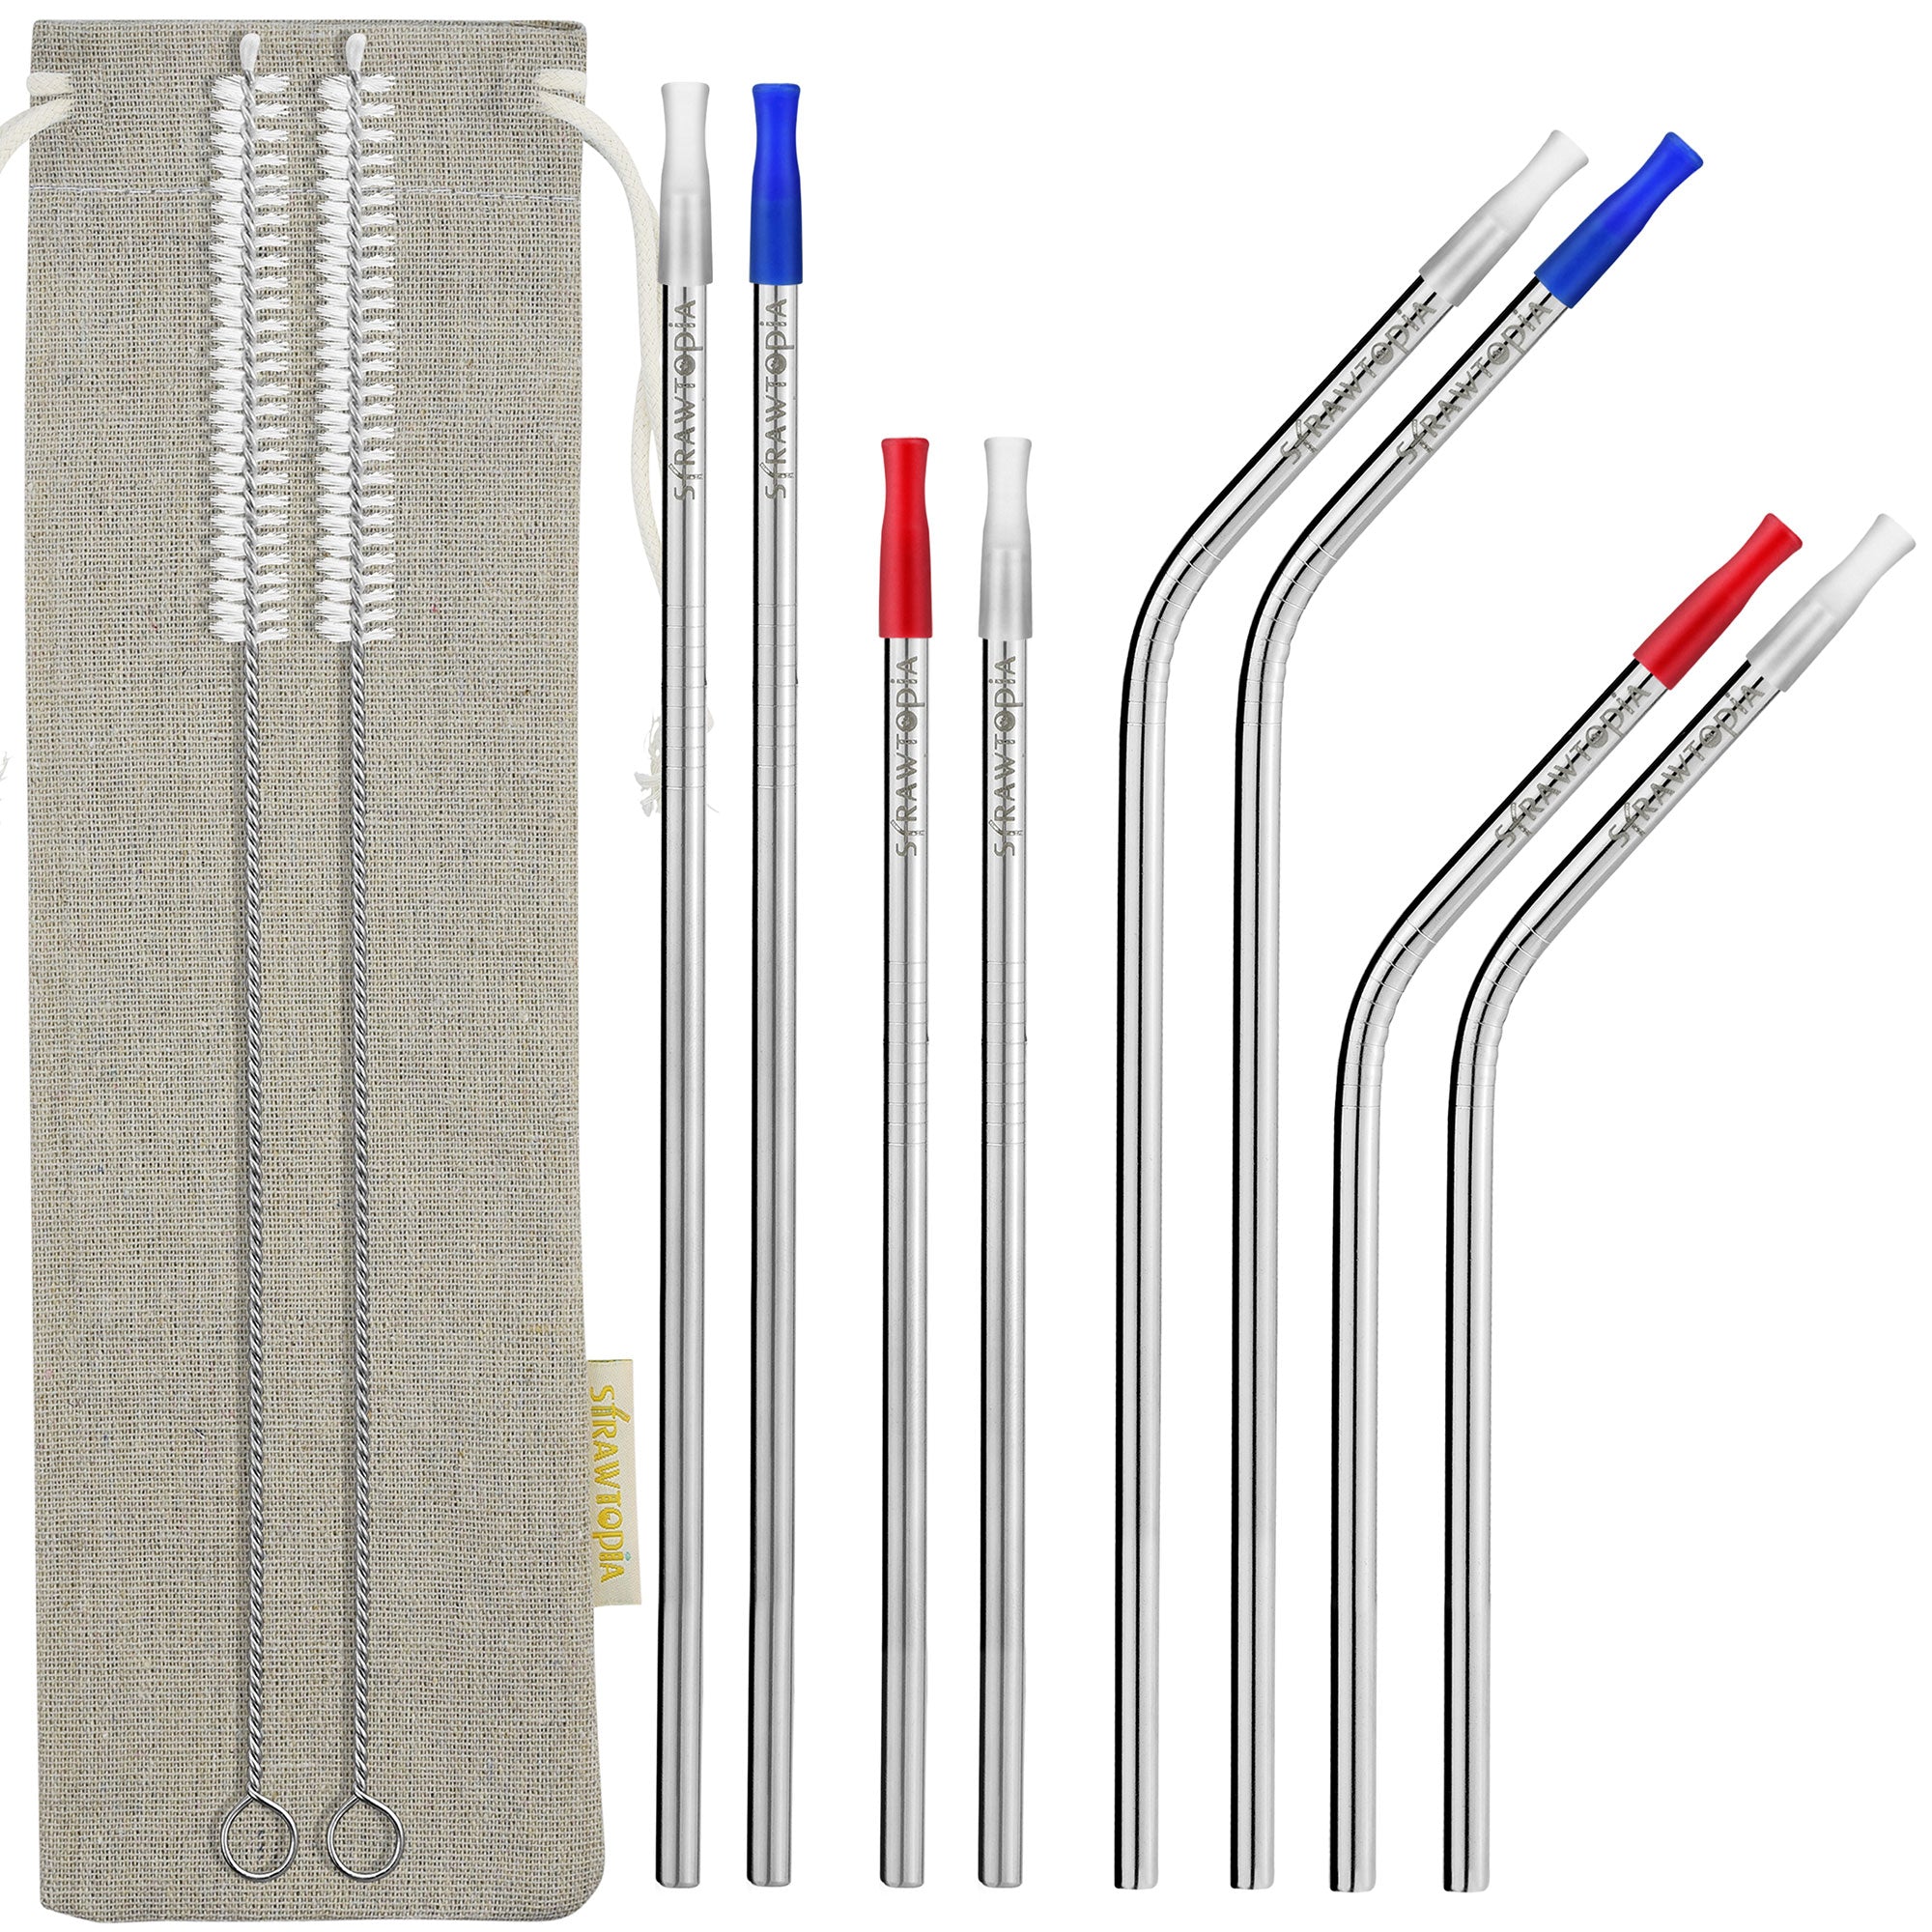 Reusable Stainless Steel Metal Straws with Silicon Tips & Cleaning